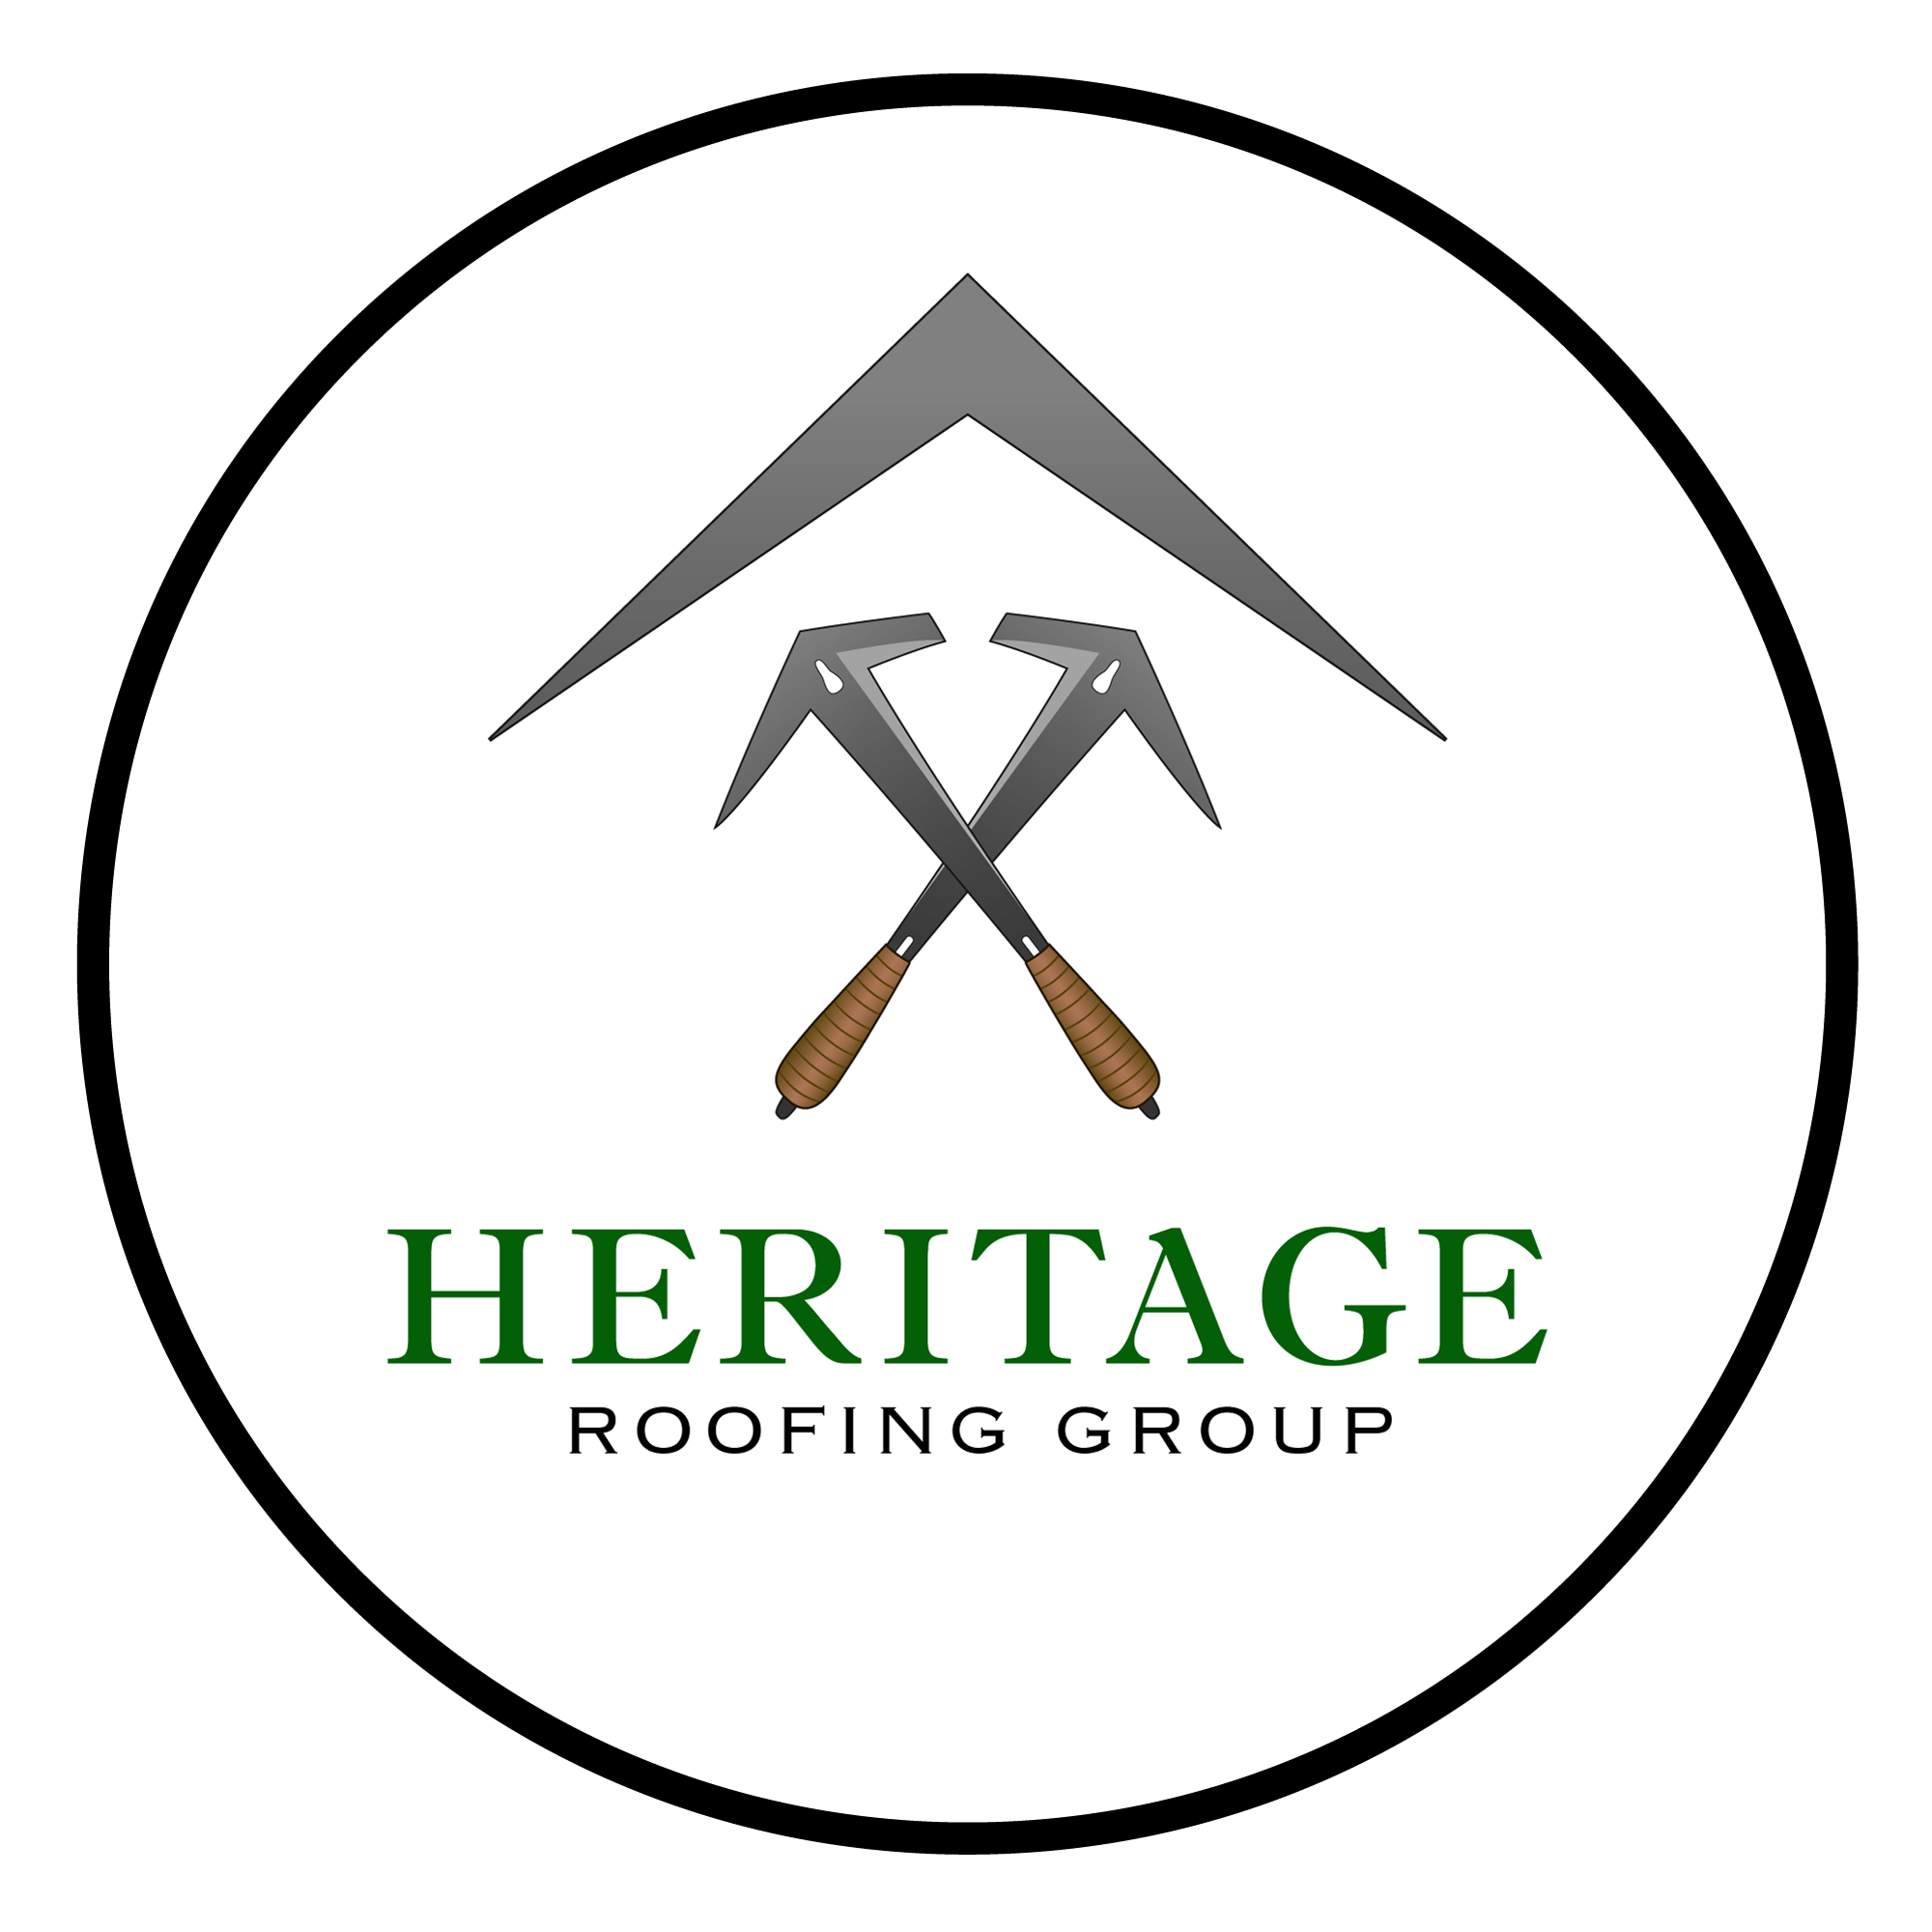 Heritage Roofing Group